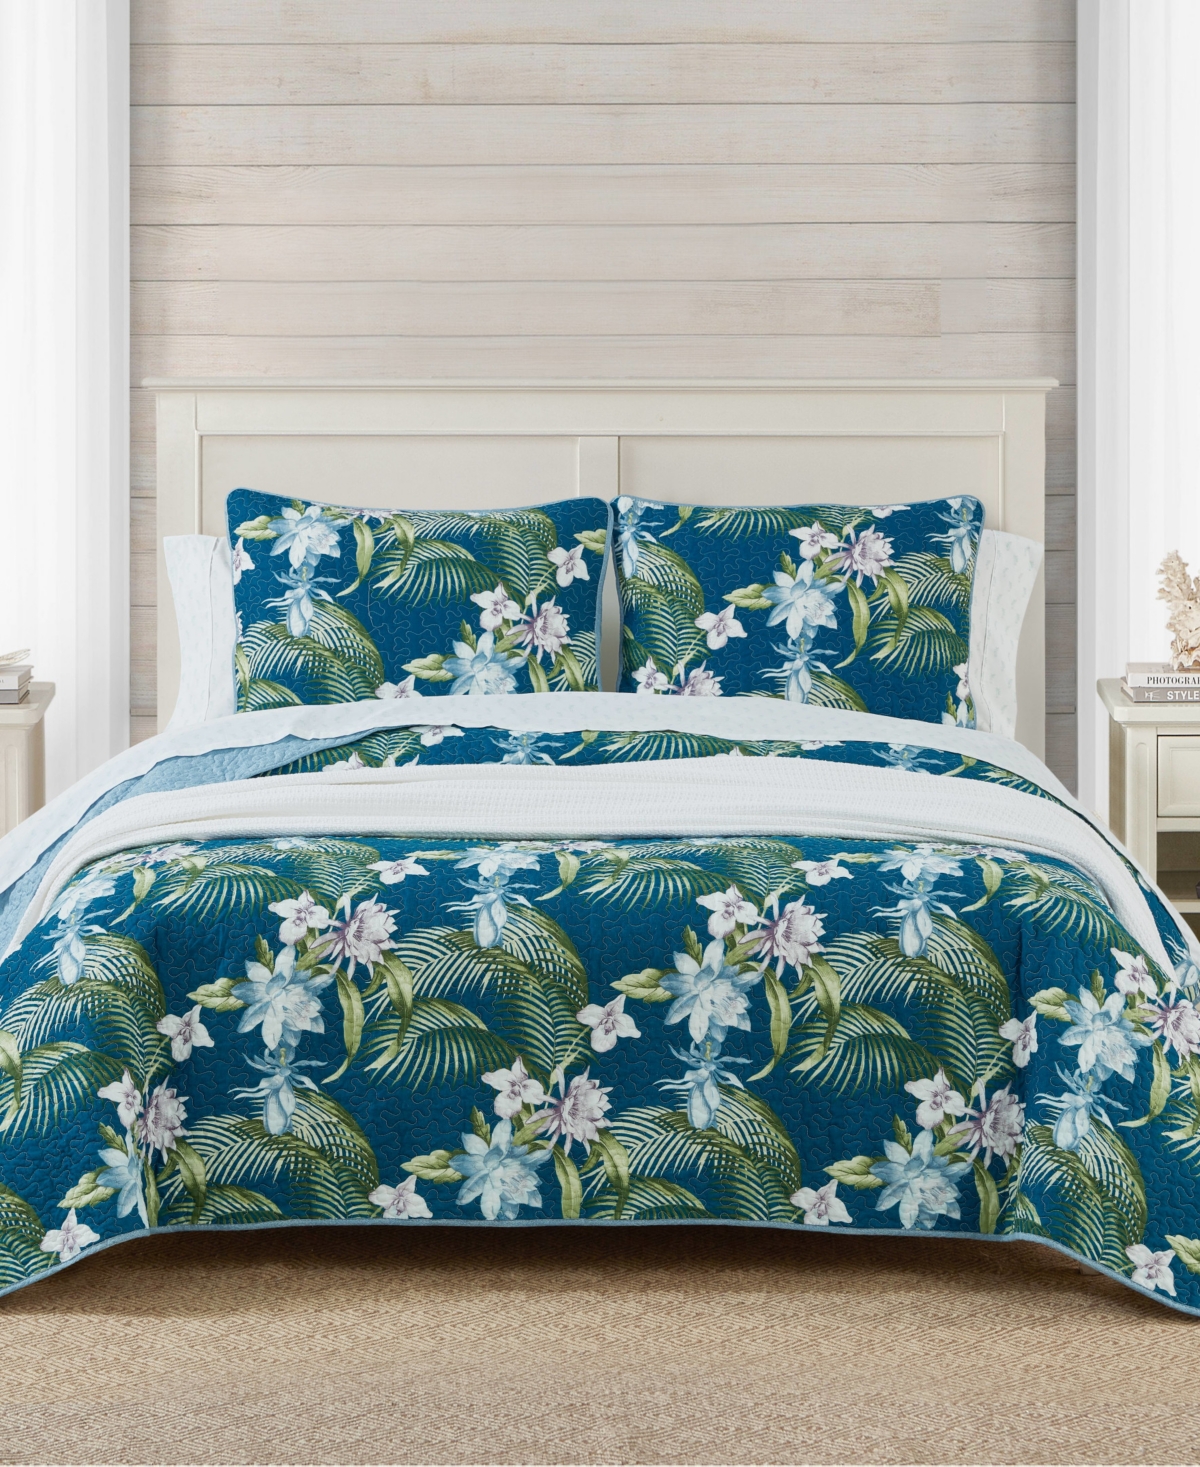 TOMMY BAHAMA HOME SOUTHERN BREEZE REVERSIBLE 3 PIECE QUILT SET, KING BEDDING